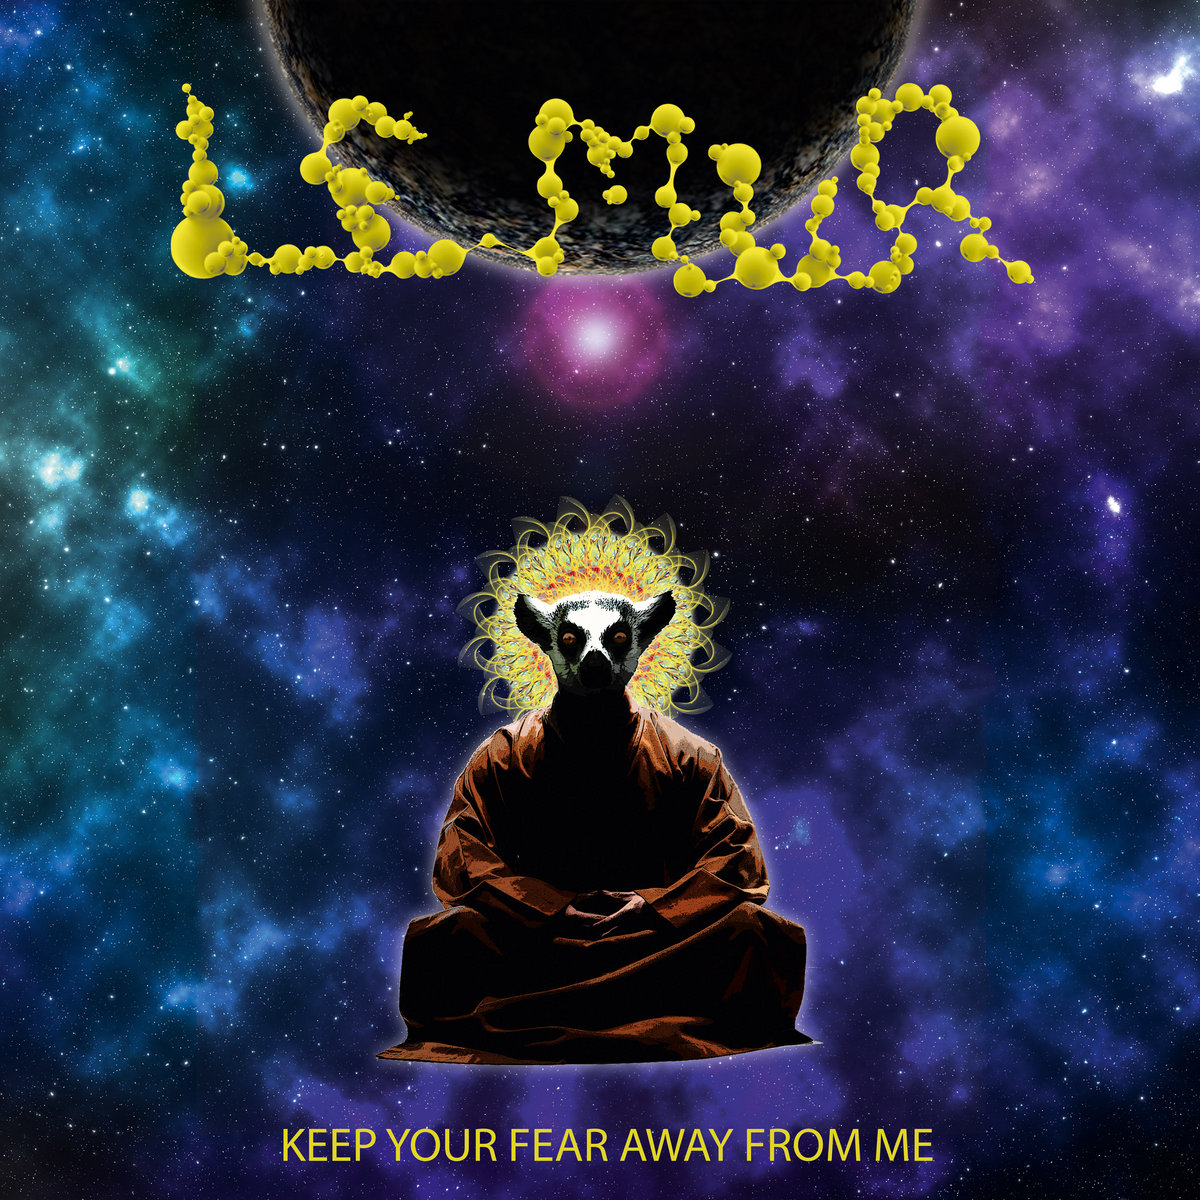 Album Review: Keep Your Fear Away From Me By Le Mur